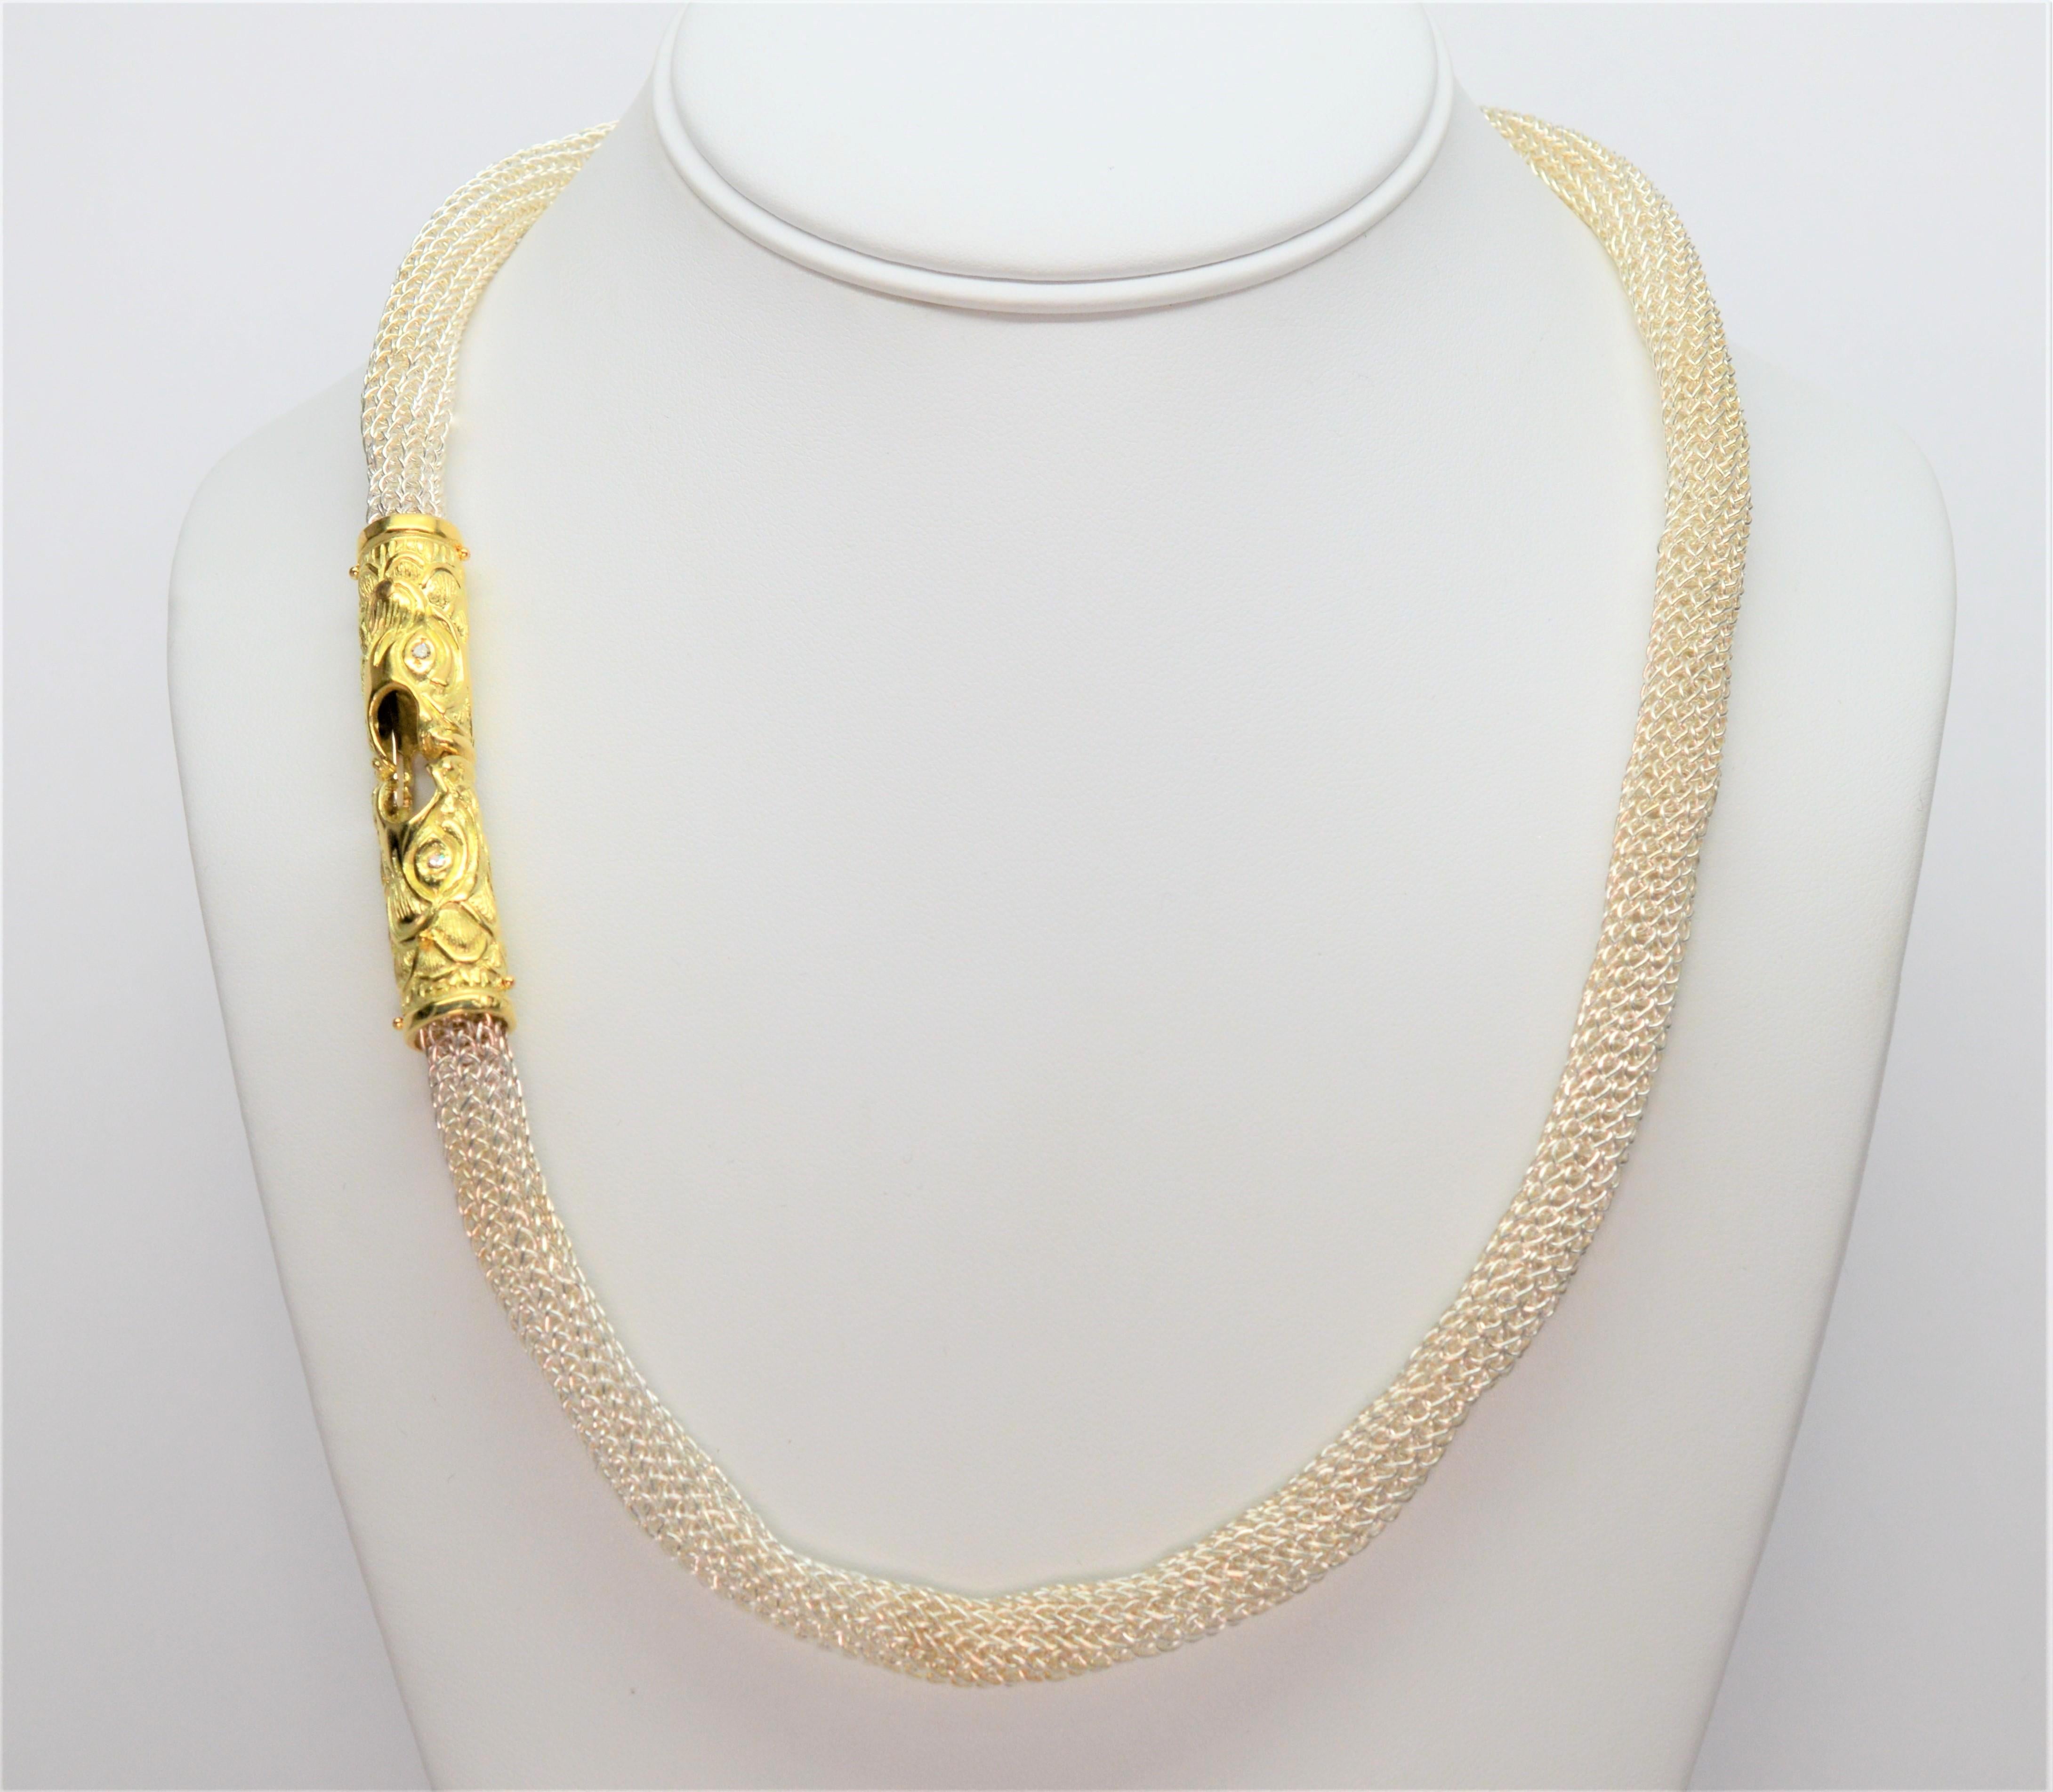 Intriguing 18 Karat Yellow Gold Serpent Heads with Diamond Eyes meet to create this exotic twenty-one inch necklace made of unique Sterling Silver tubular mesh chain.   Gift Boxed.  